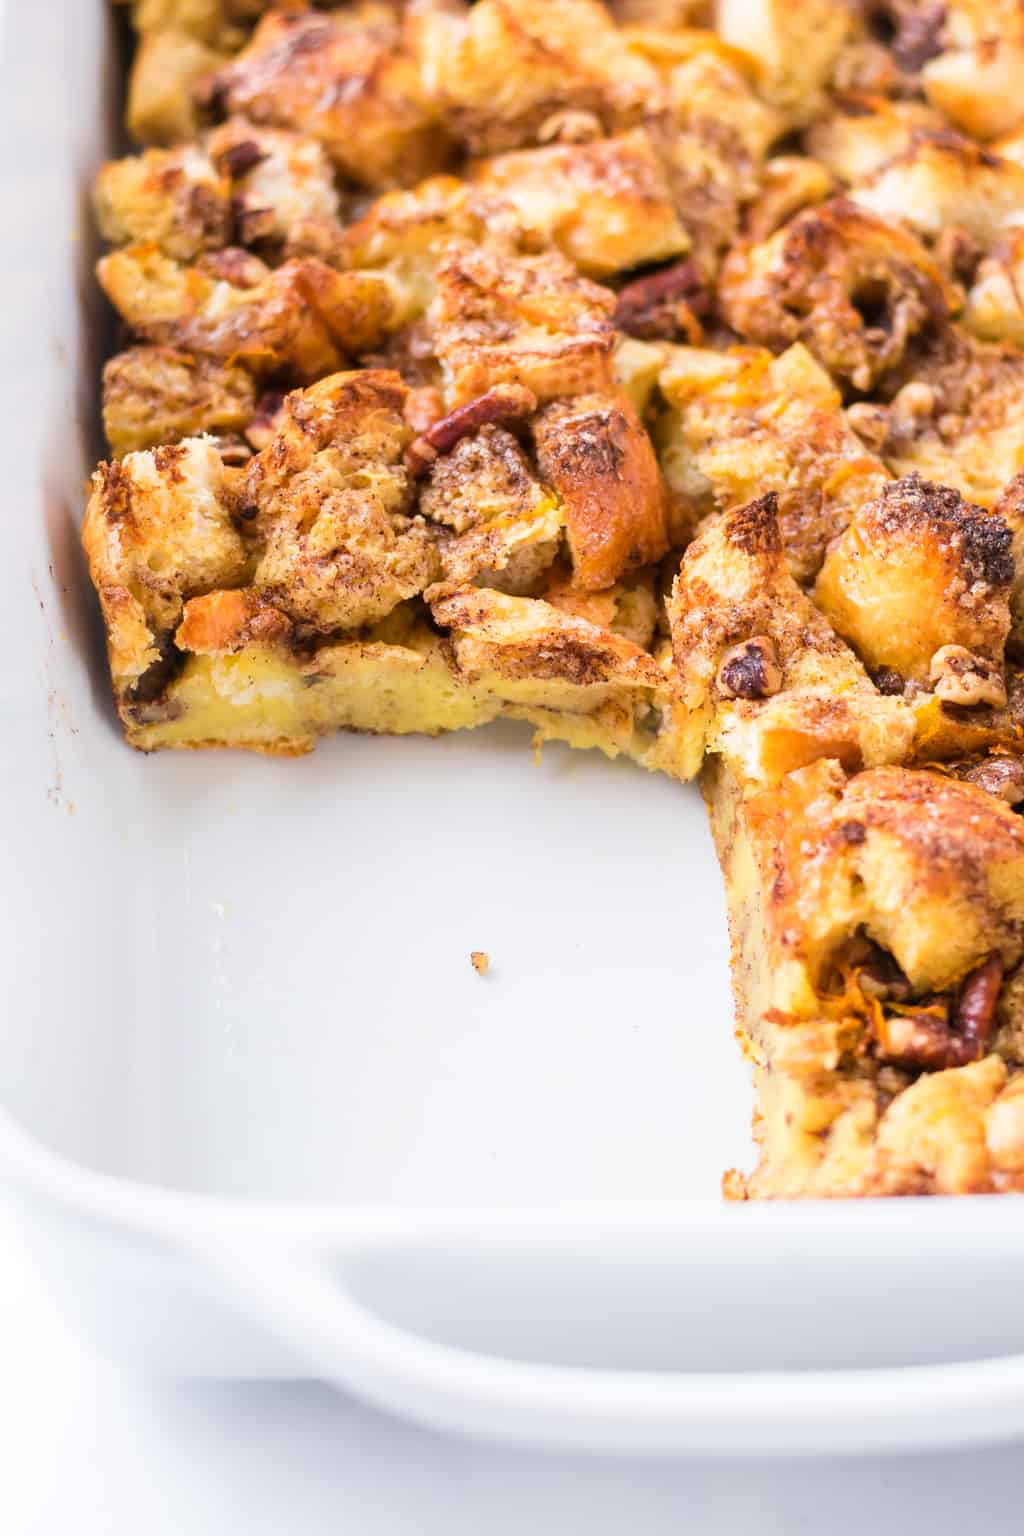 Easy French Toast Casserole - Recipes From A Pantry